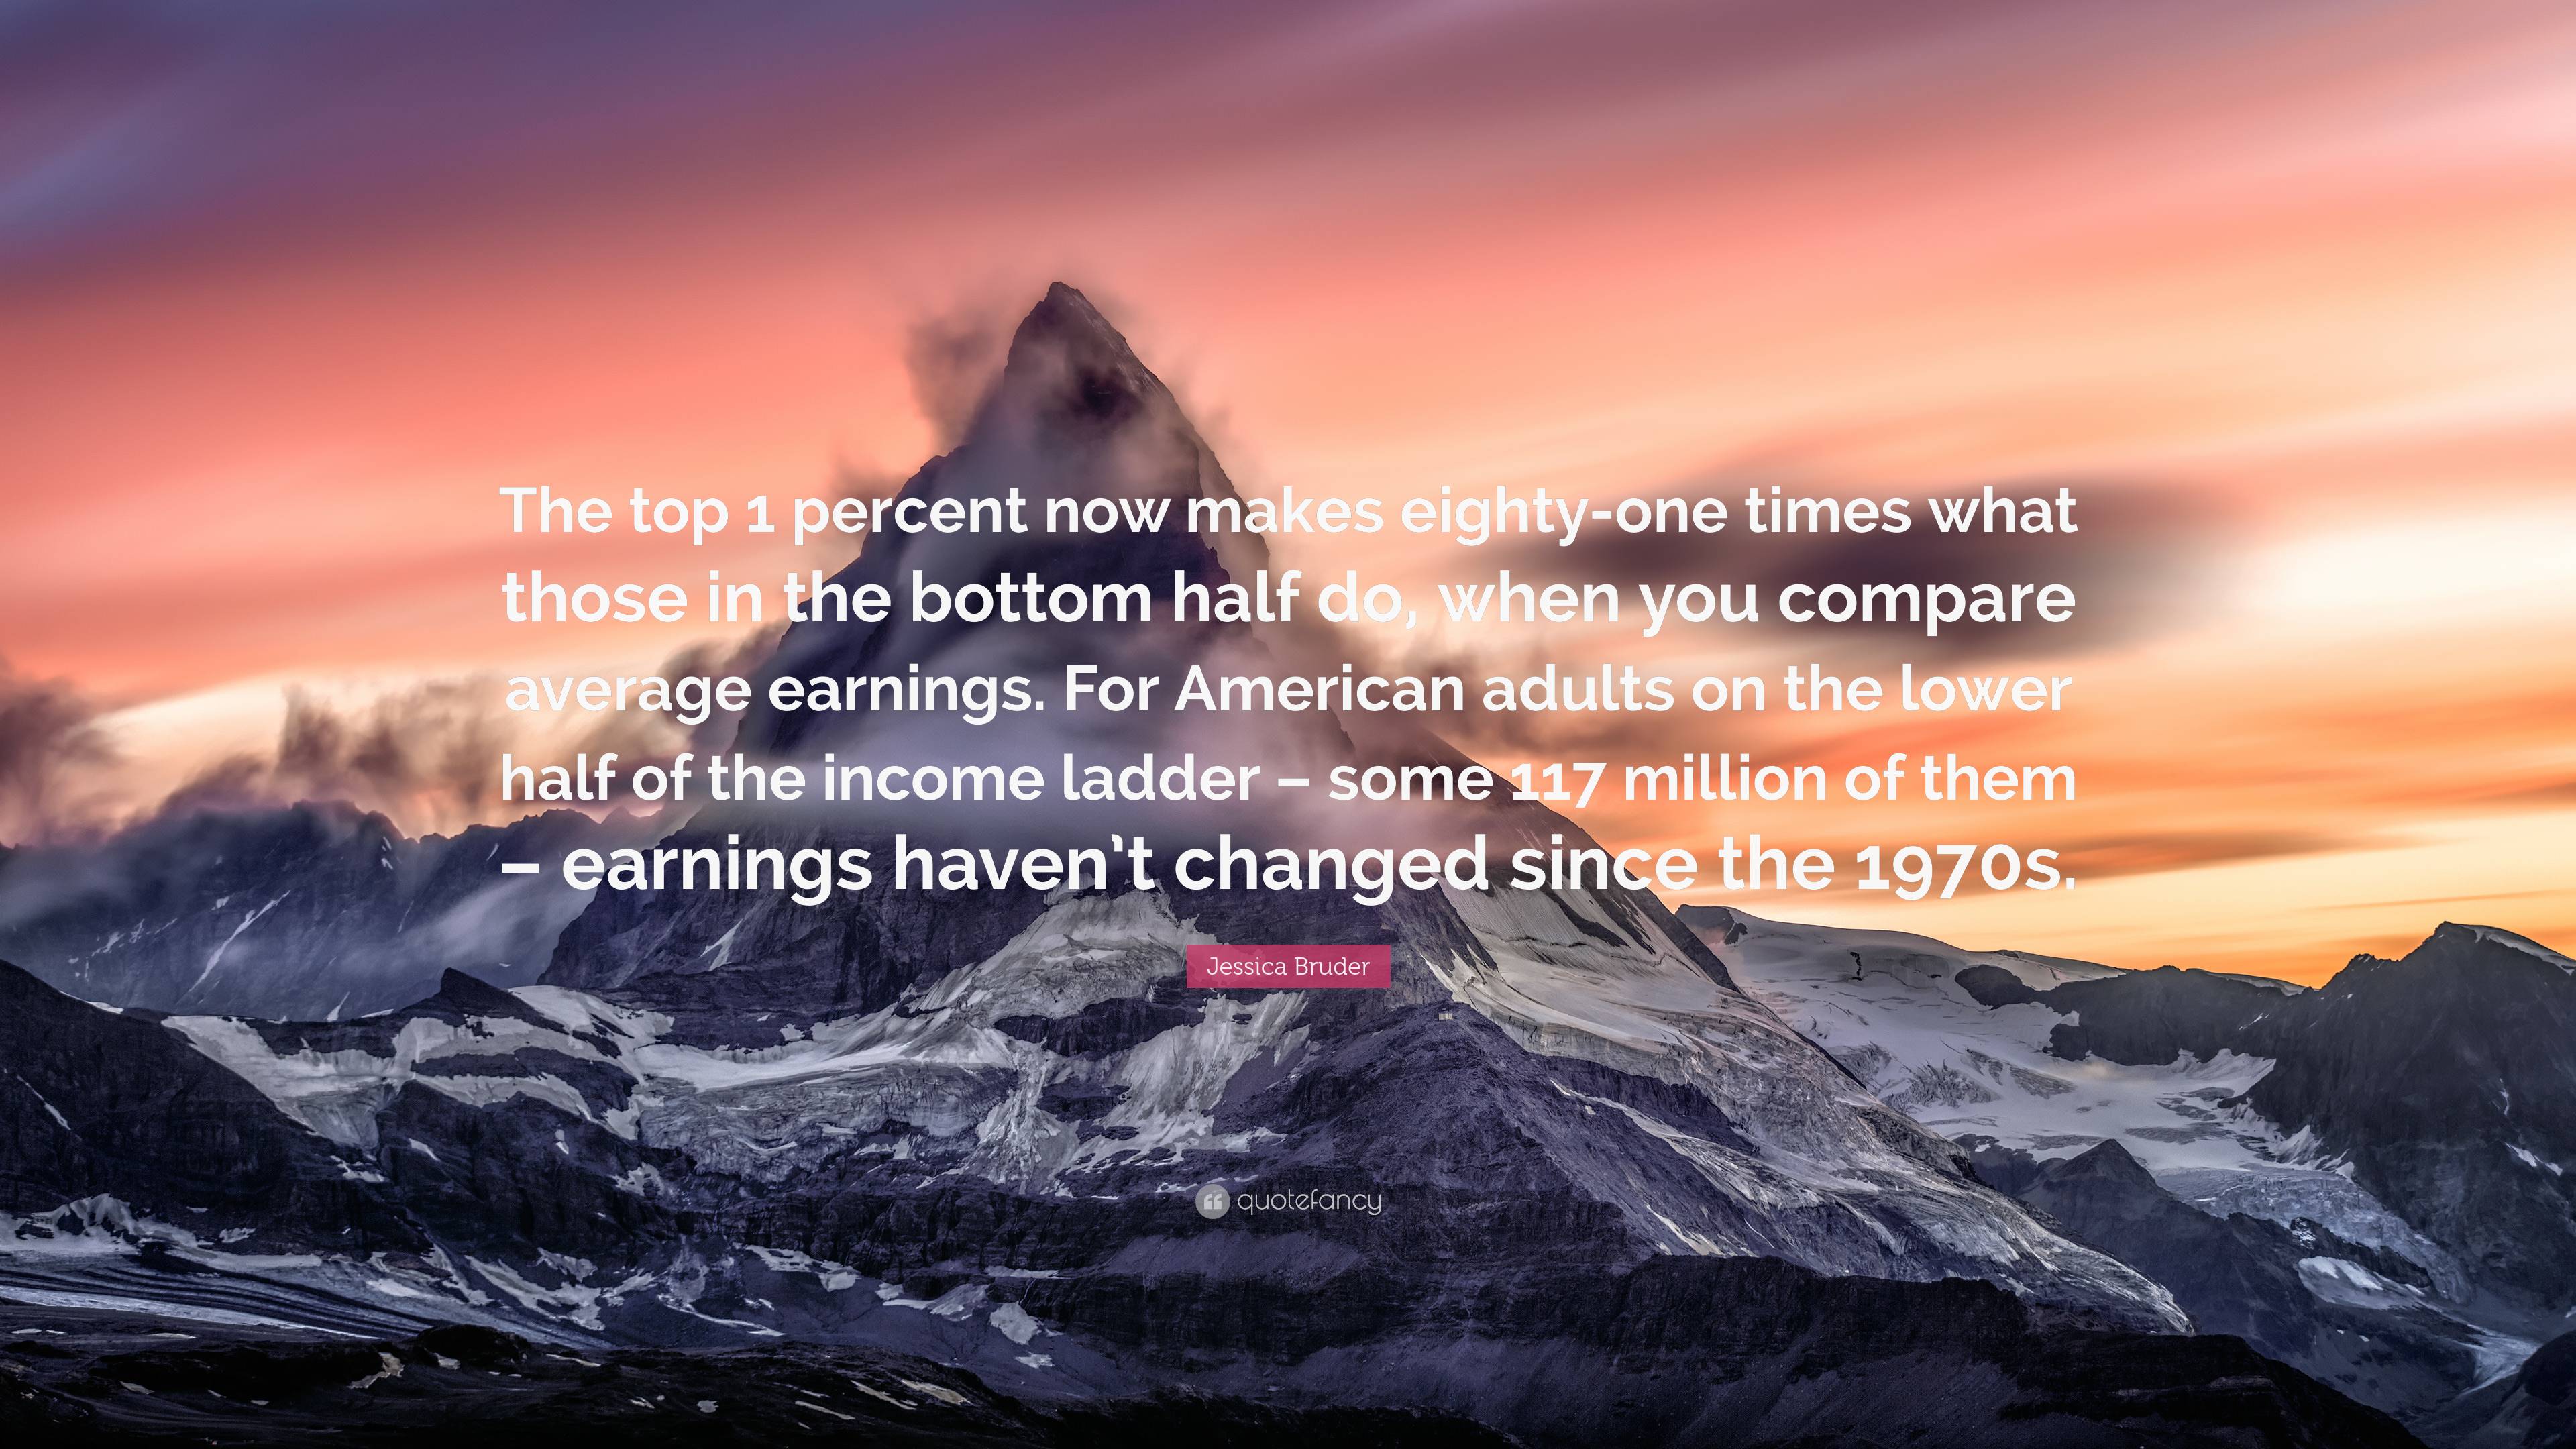 Jessica Bruder Quote: “The top 1 percent makes eighty-one times what those in the bottom half do, when you compare average earnings. For Am...”